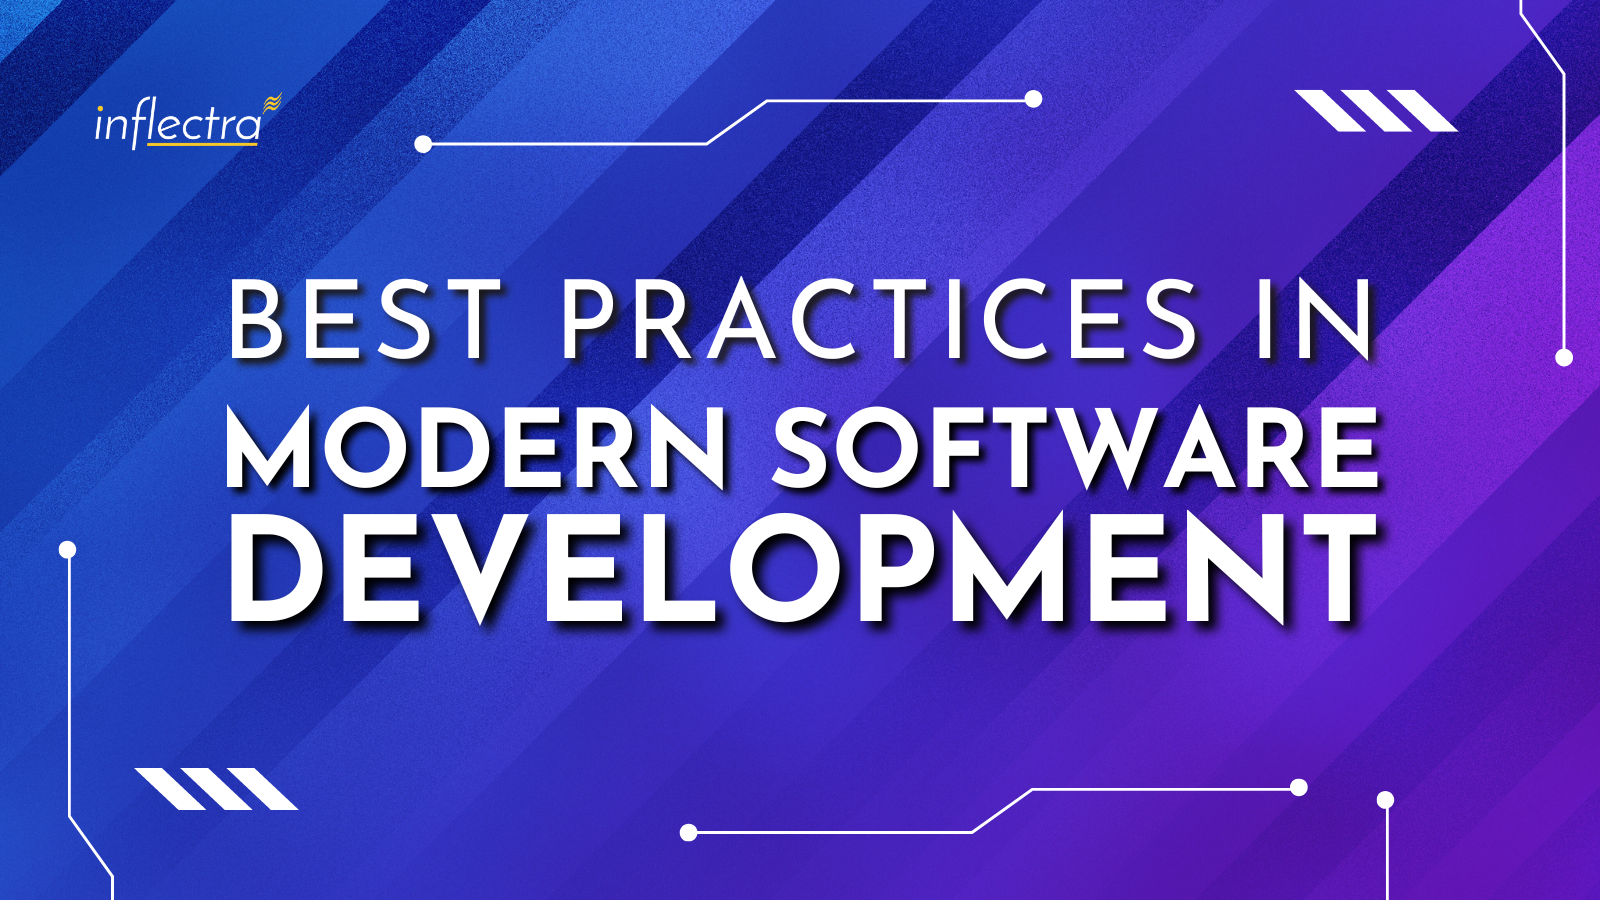 inflectra-best-practices-in-modern-software-development-image